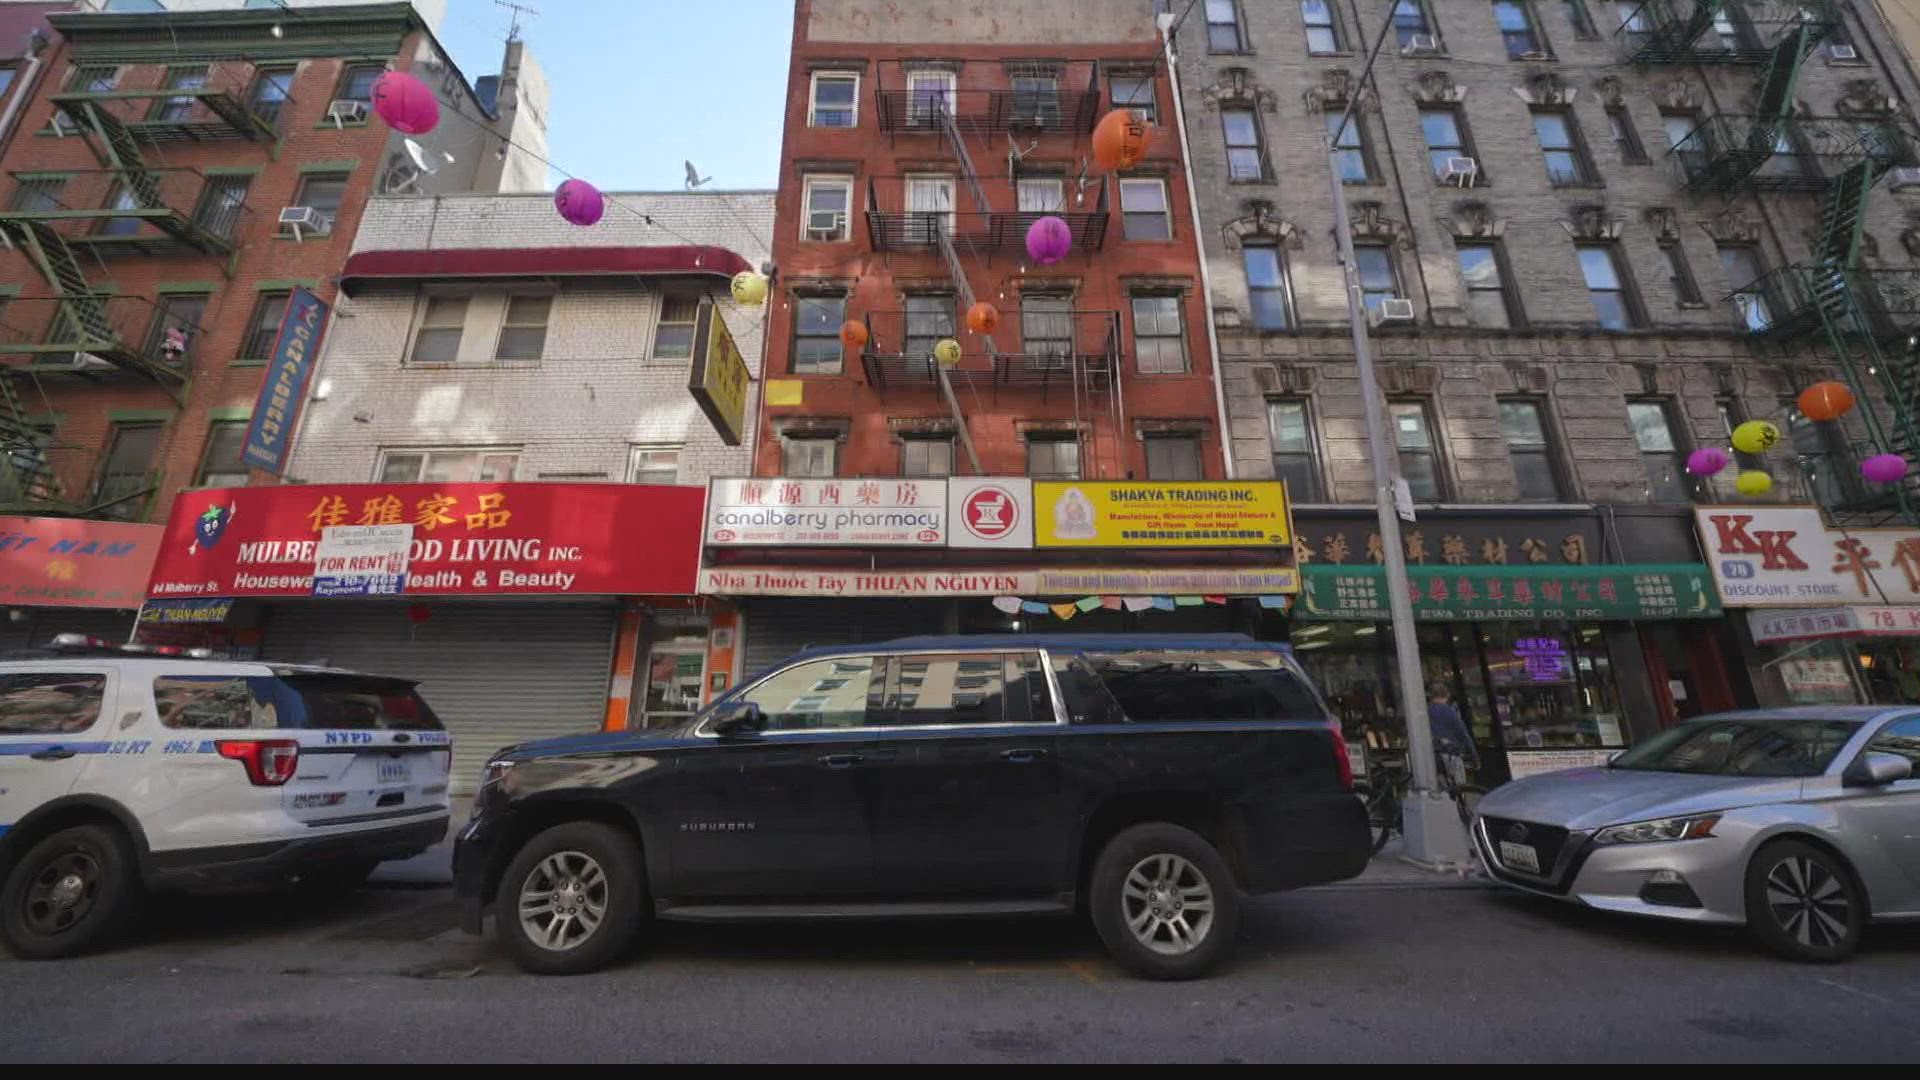 New York's Chinatown has long been known for great restaurants and shopping.